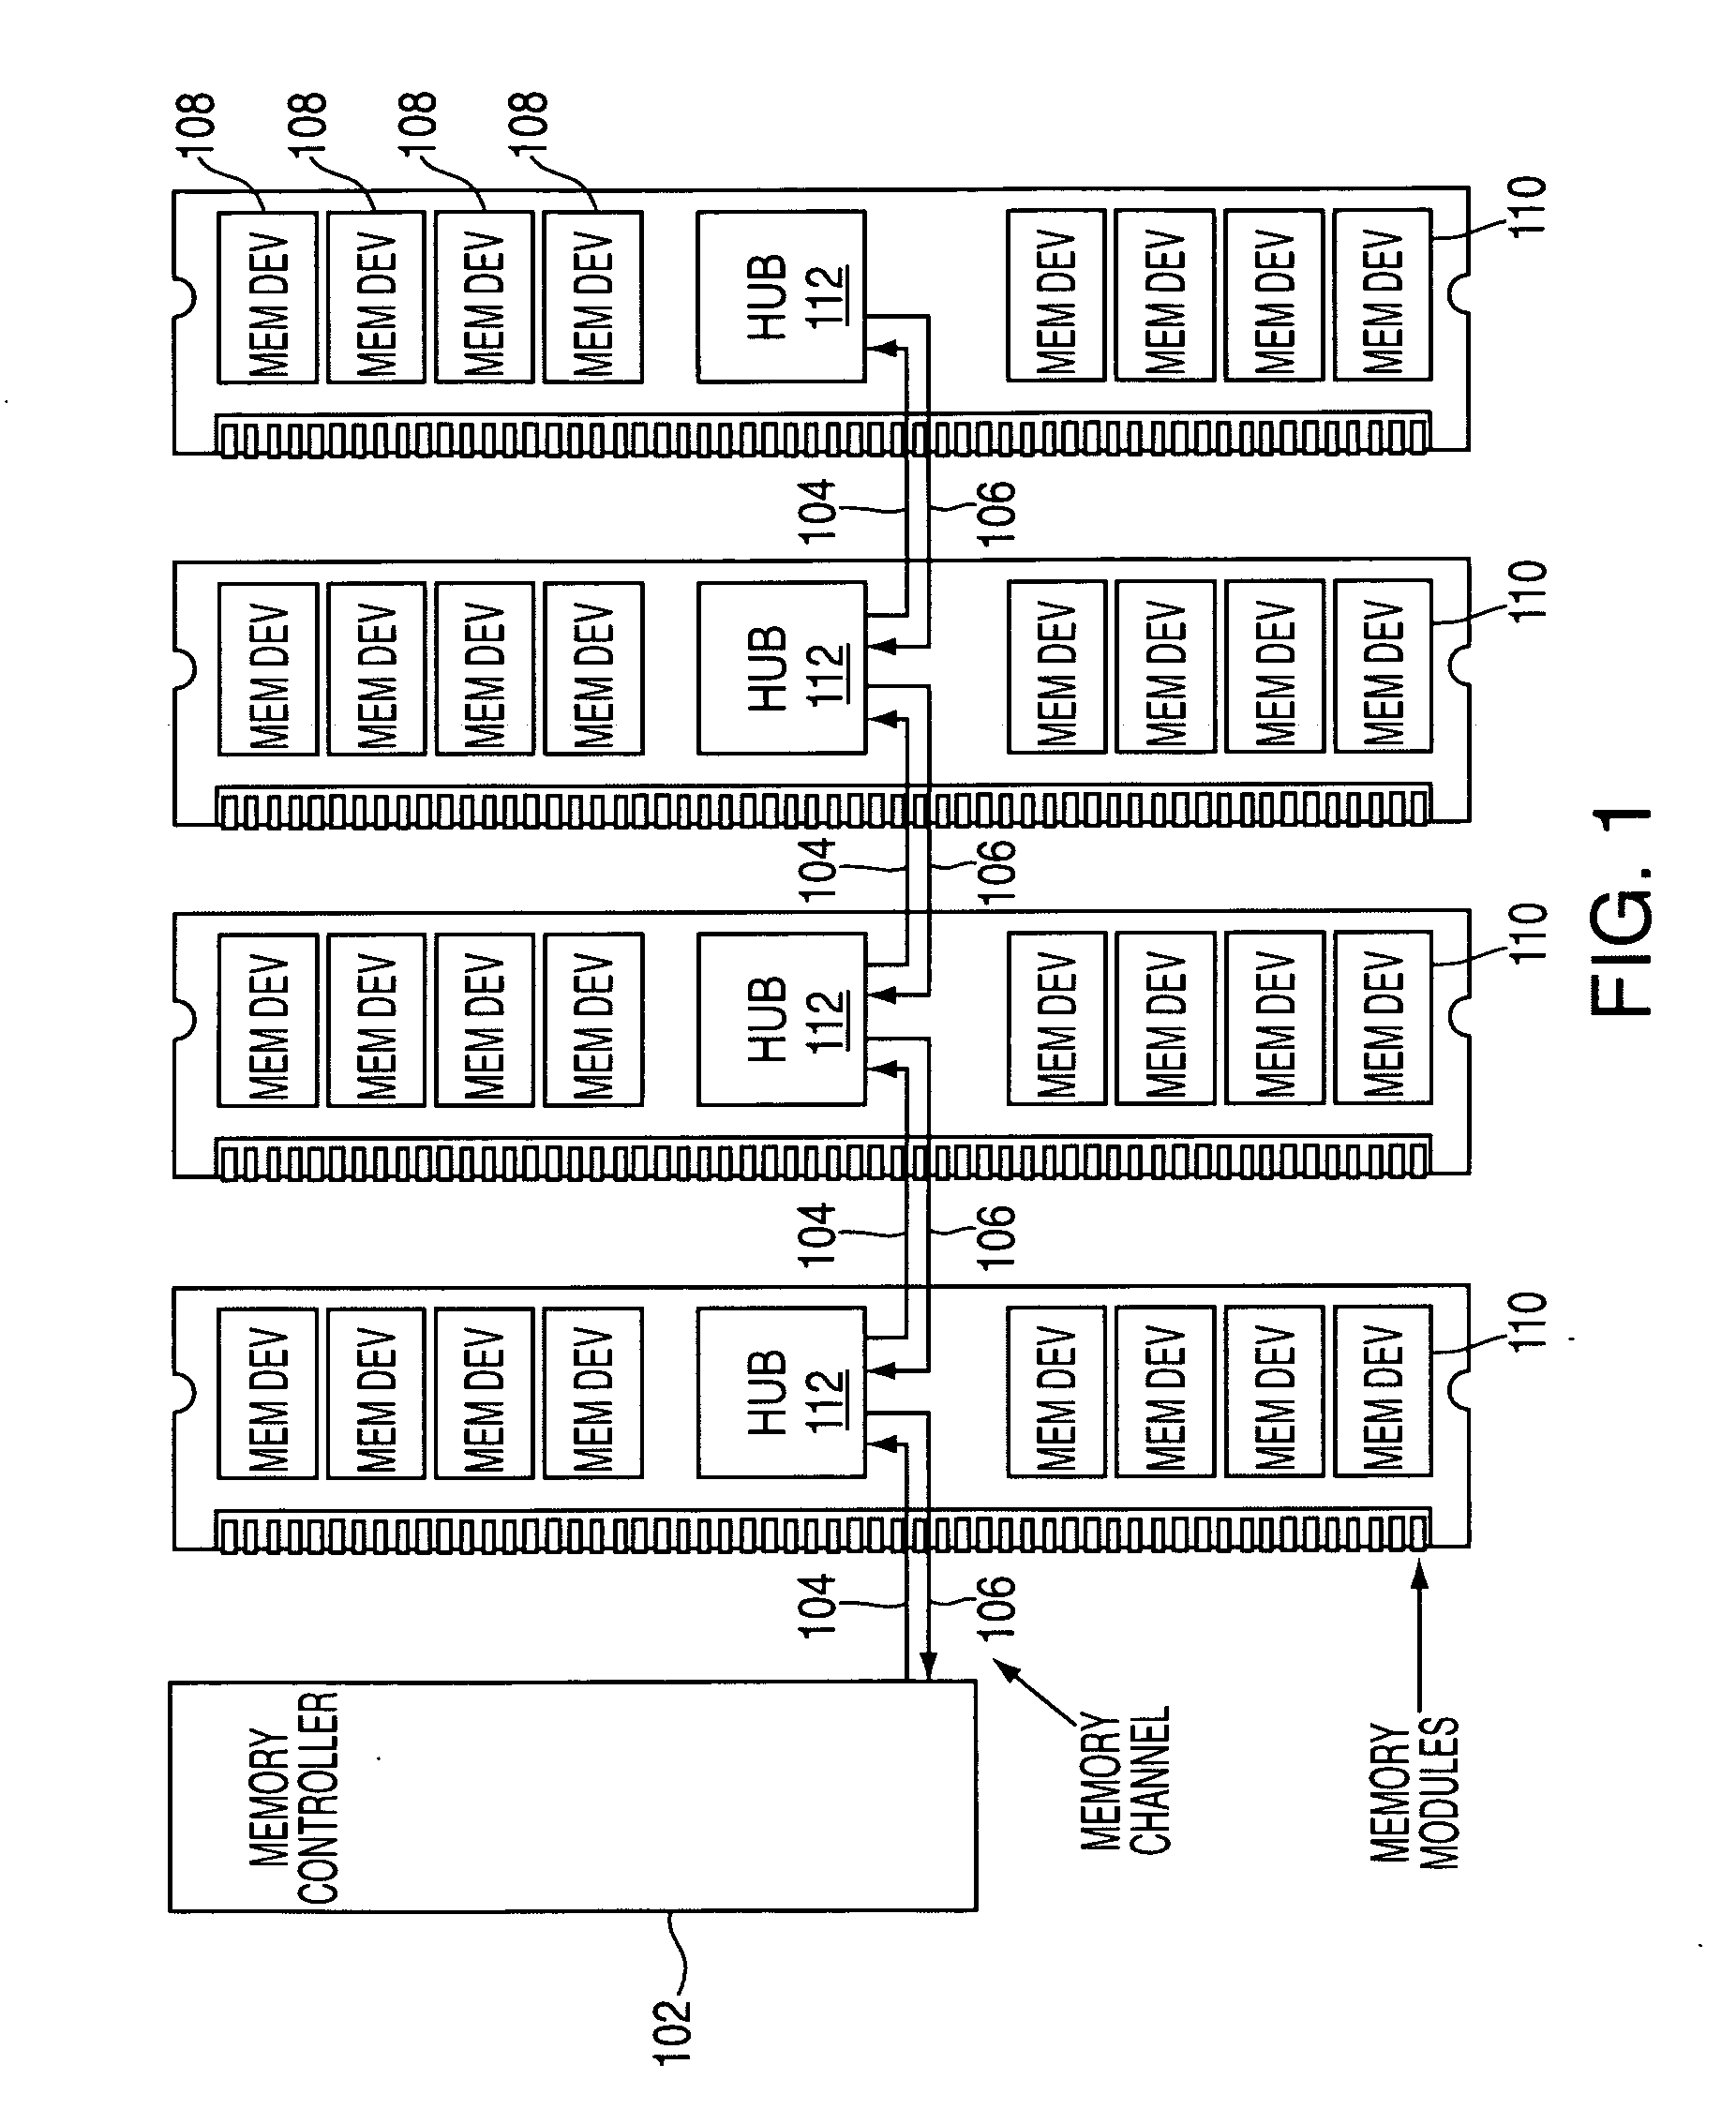 Method and system for providing indeterminate read data latency in a memory system